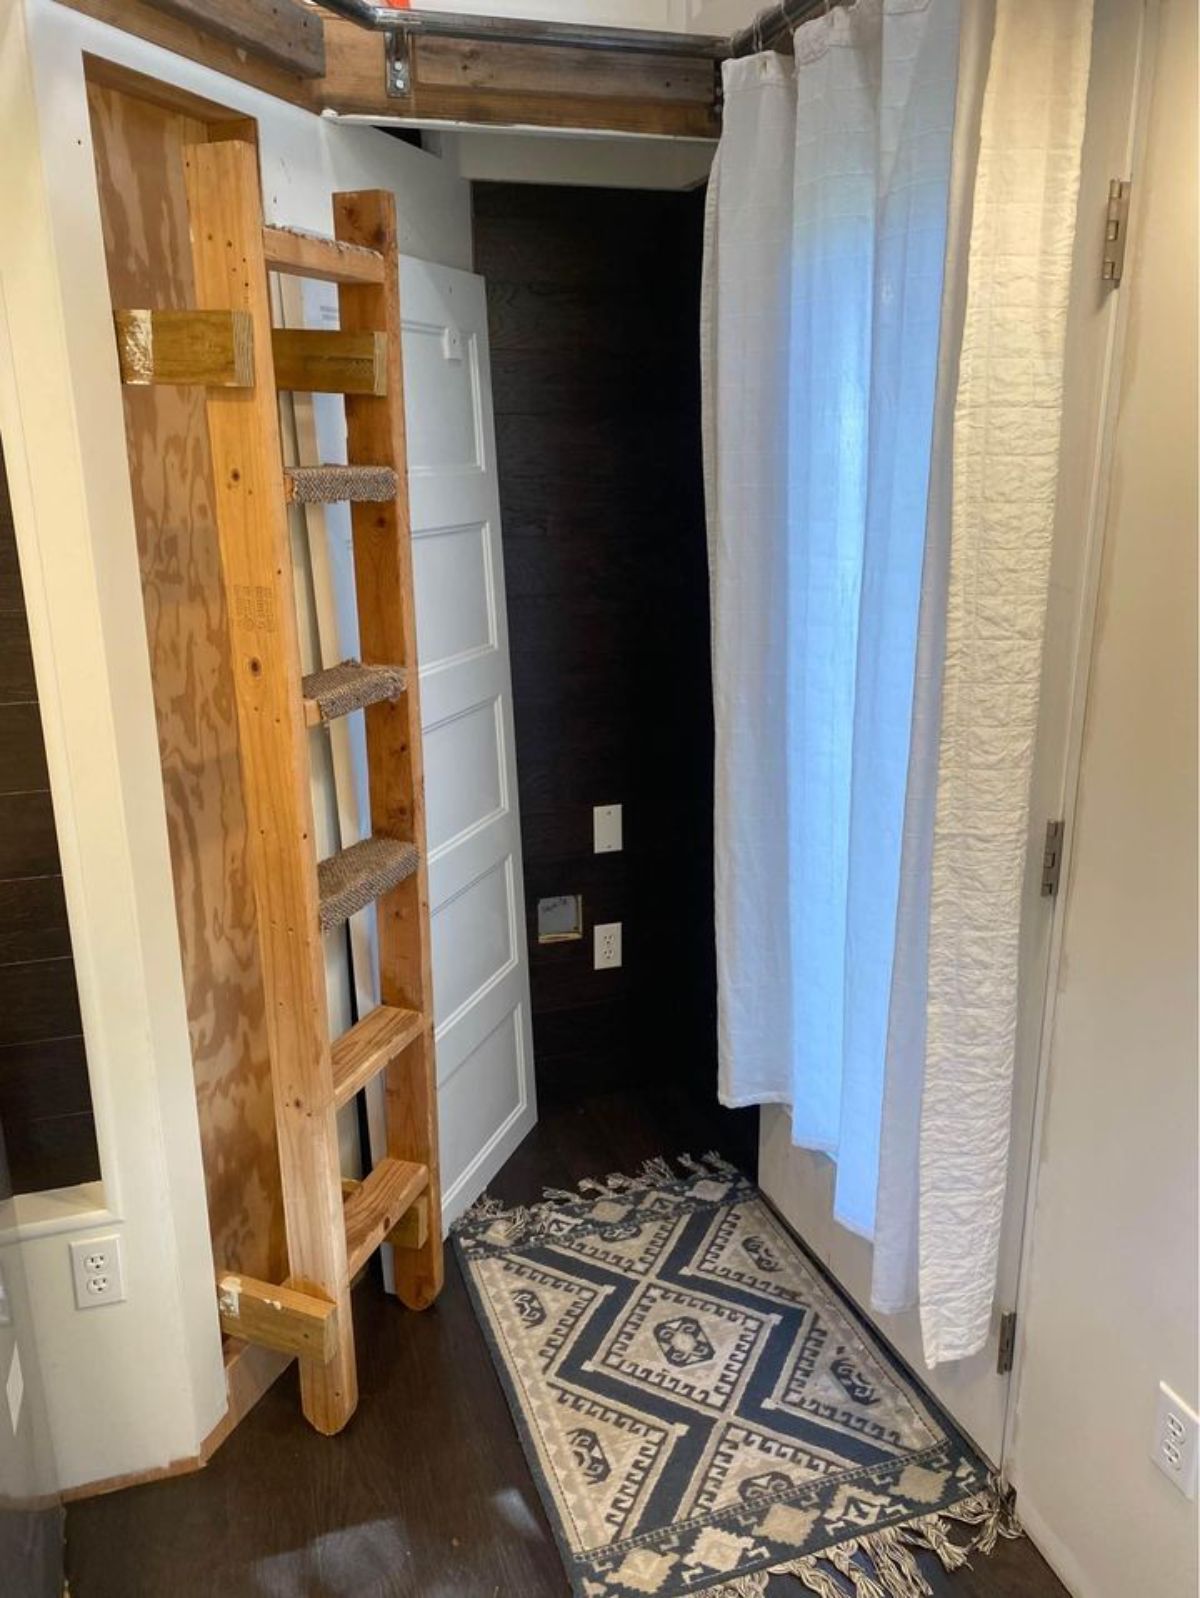 Ladder for accessing the bedroom area of Fully Furnished 12' Micro Tiny Home